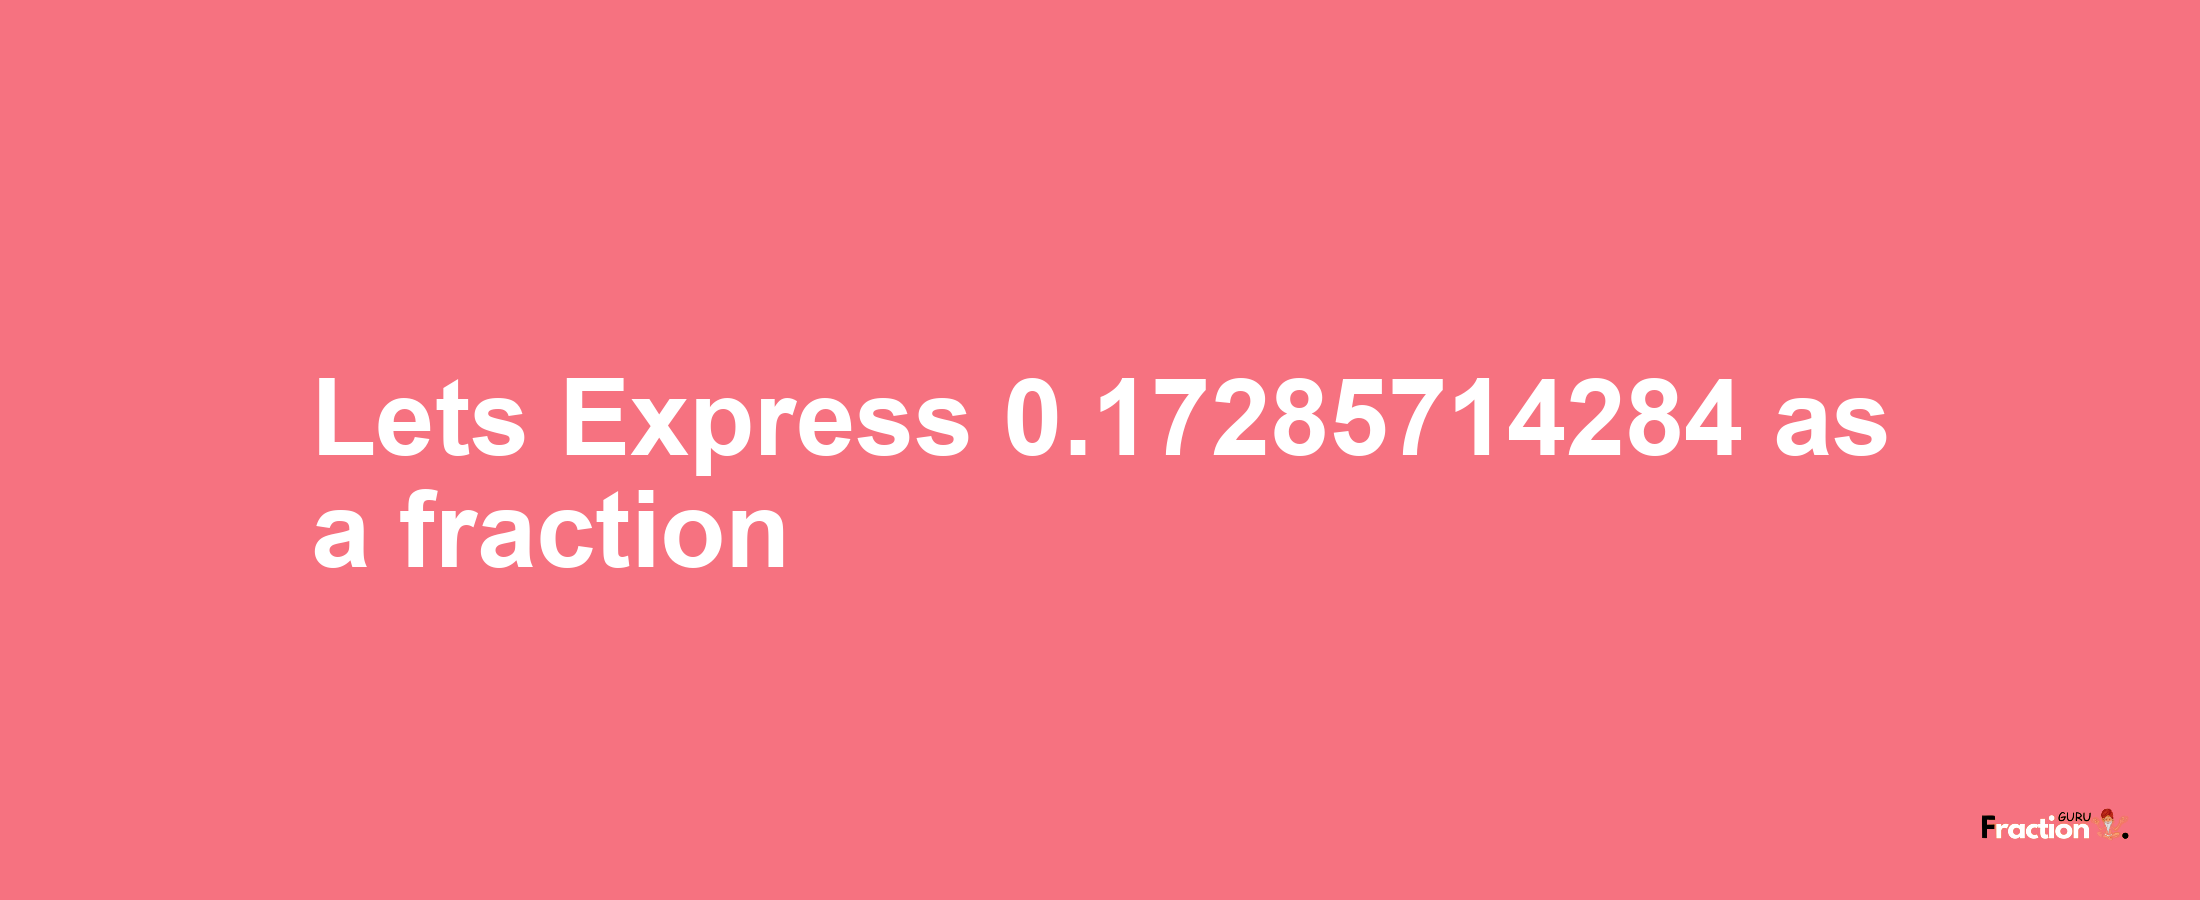 Lets Express 0.17285714284 as afraction